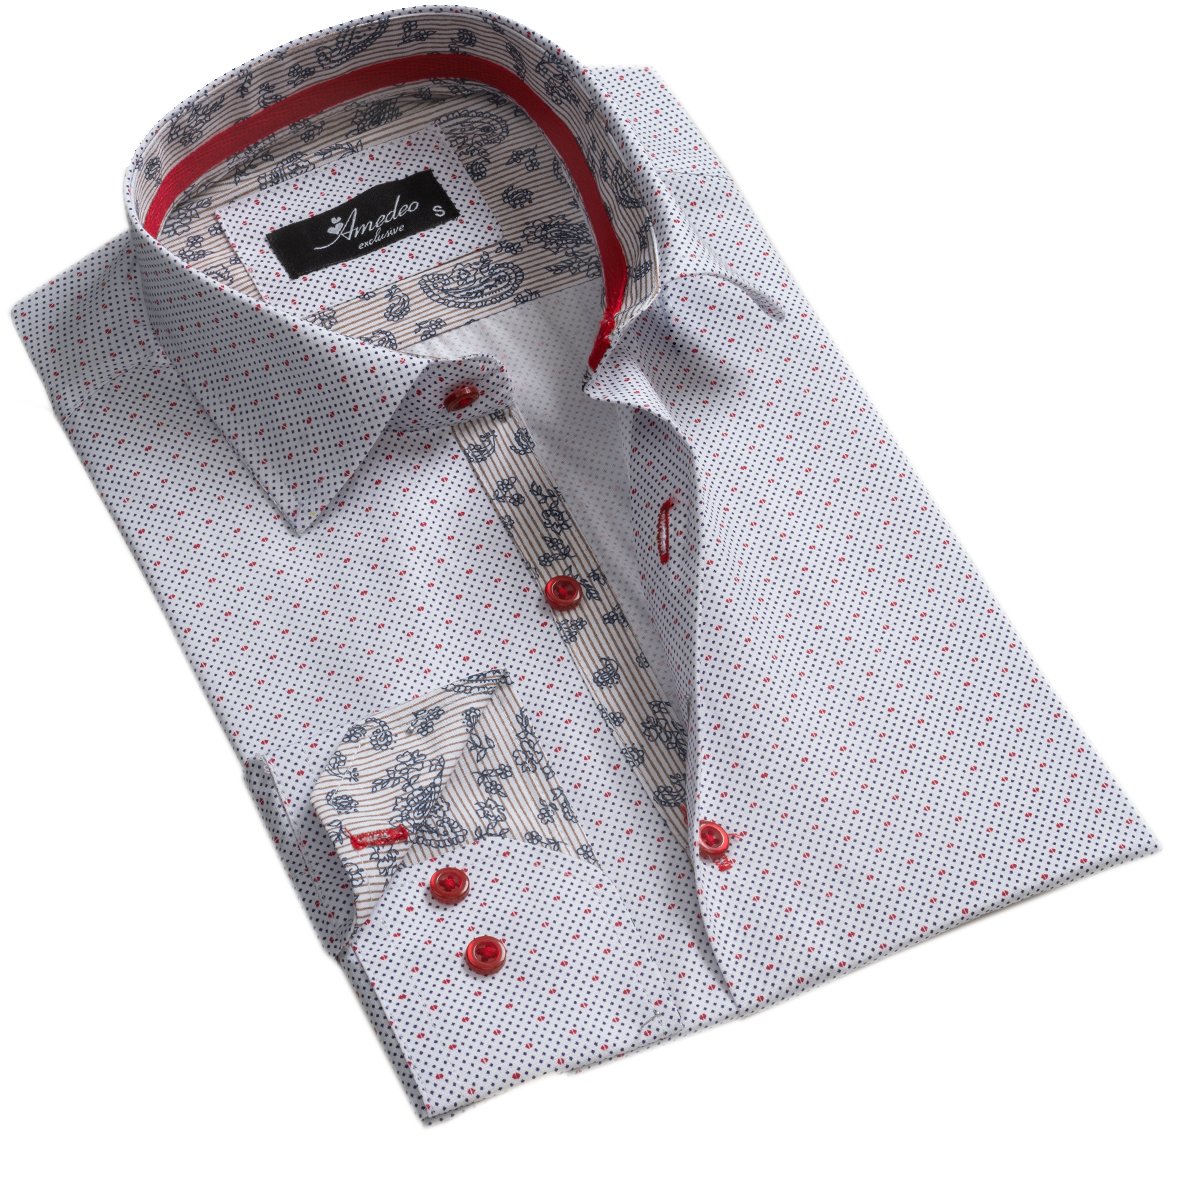 White Dots Mens Slim Fit Designer Dress Shirt - tailored Cotton Shirts for Work and Casual Wear - Amedeo Exclusive